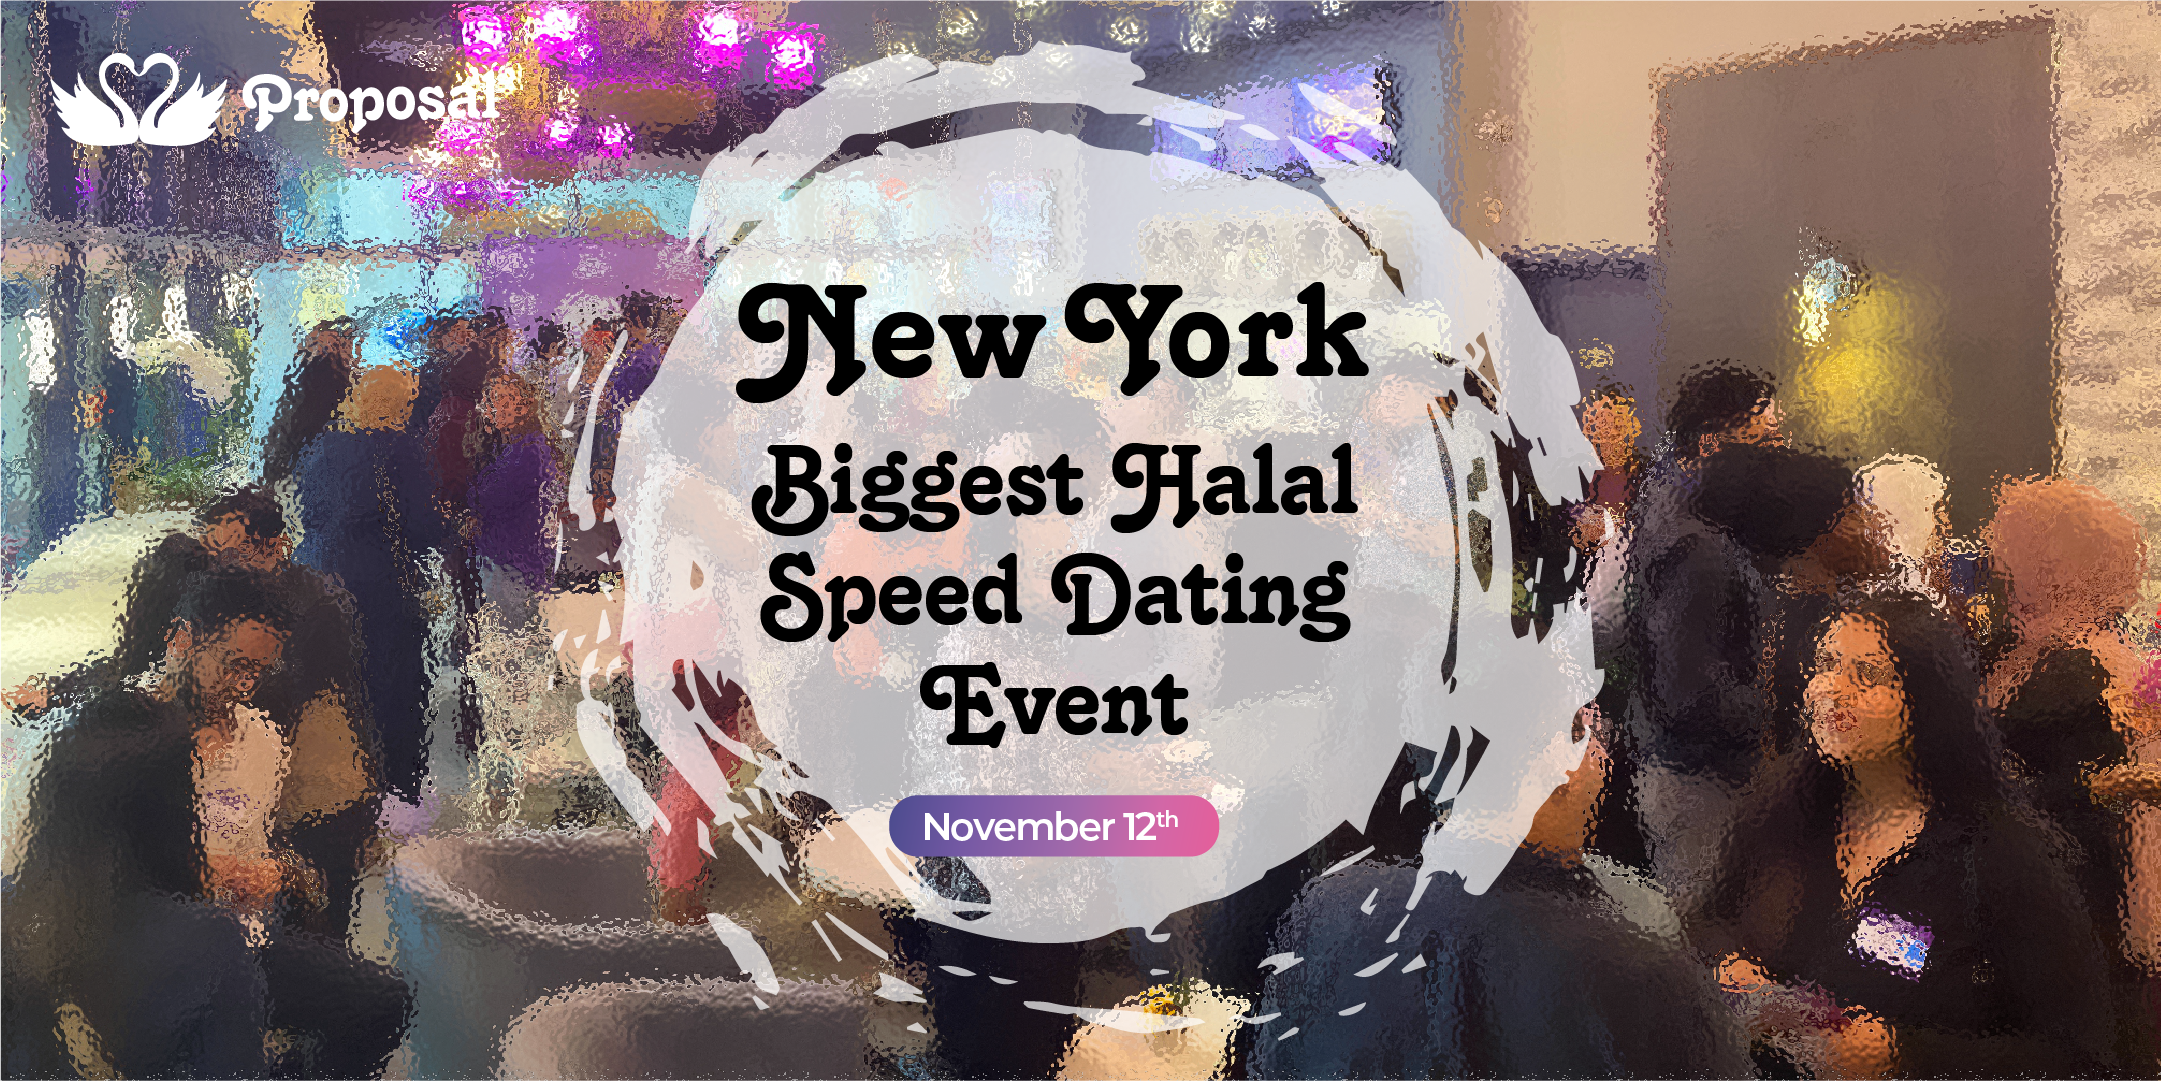 Proposal Presents BIGGEST HALAL Speed Dating Event NEW YORK